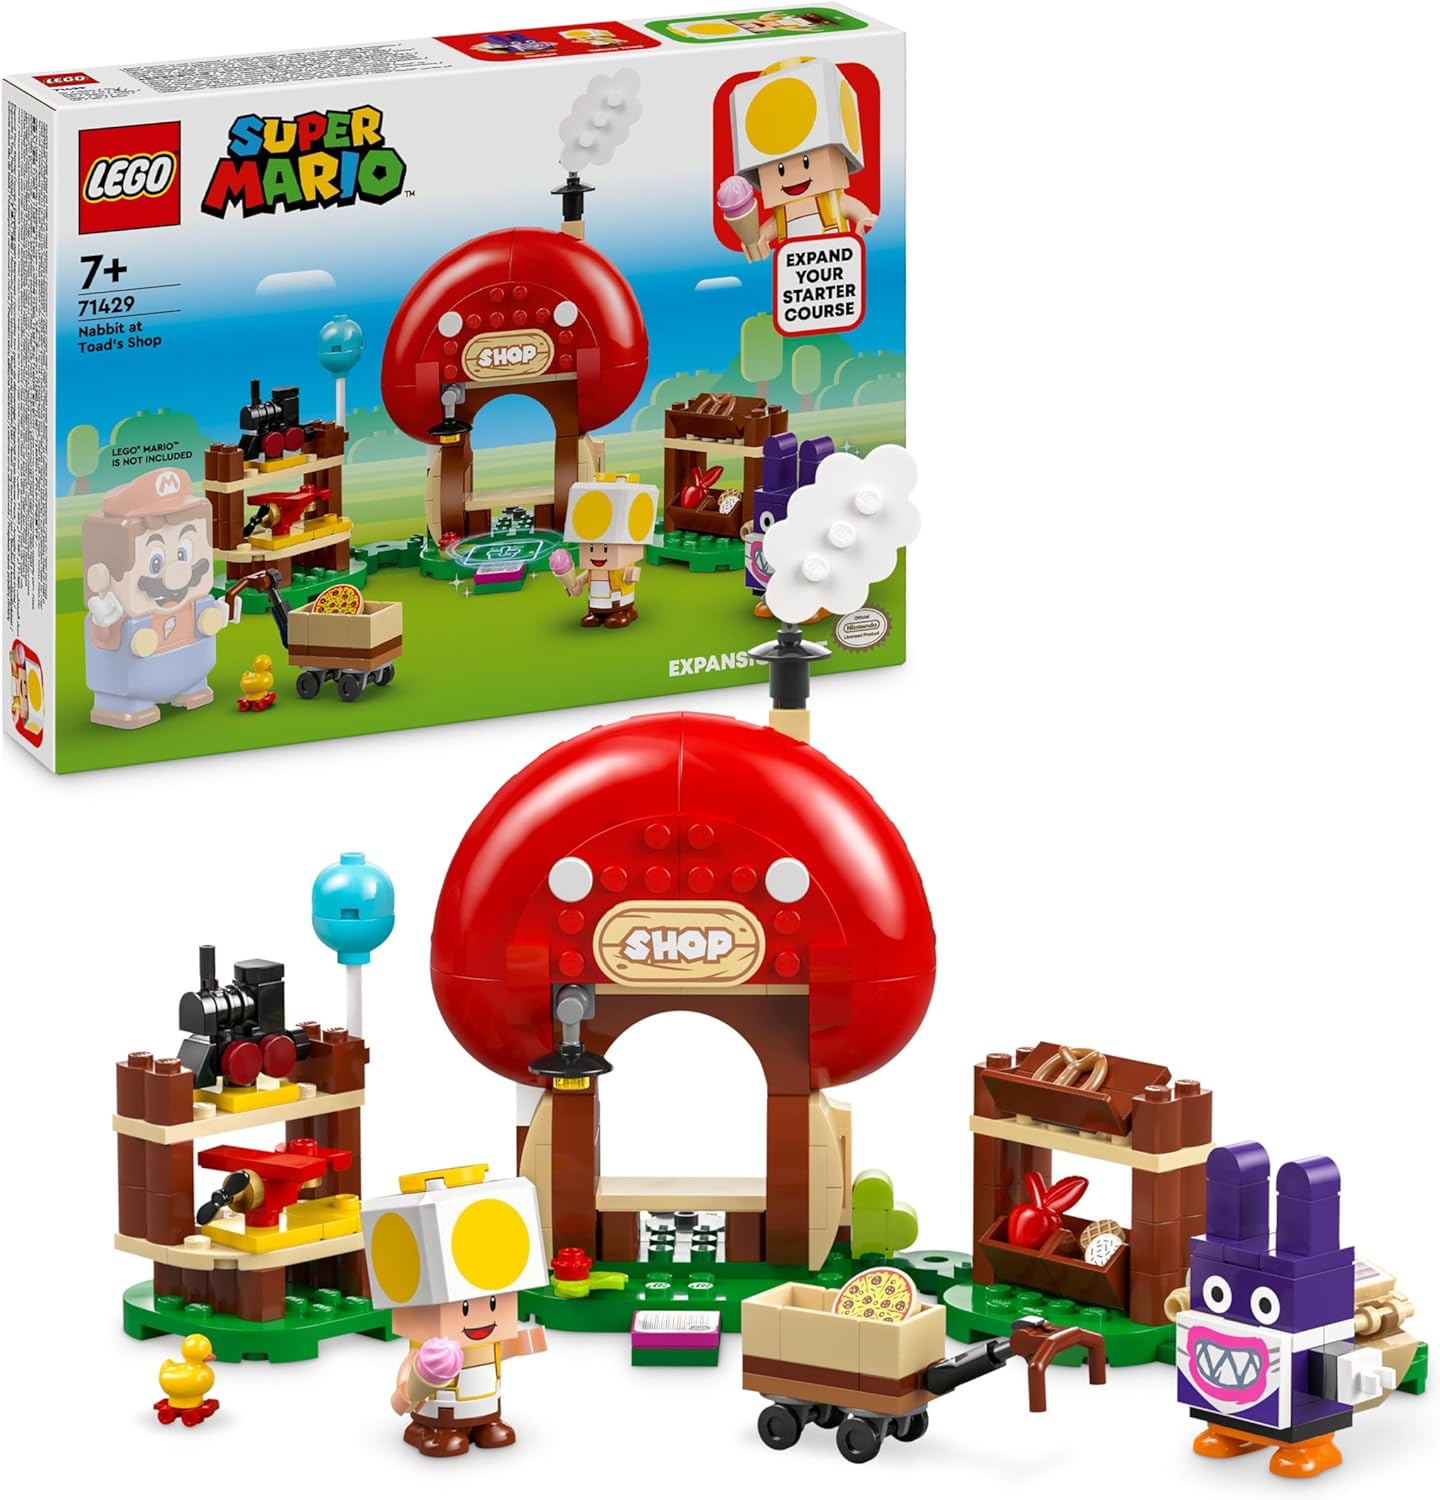 LEGO Super Mario Mopsie in Toads Shop - Expansion Set, Toy with 2 Figures to Build for Children, Fan Items, Collectable Set, Small Gift for Gamers, Boys and Girls, from 7 Years, 71429